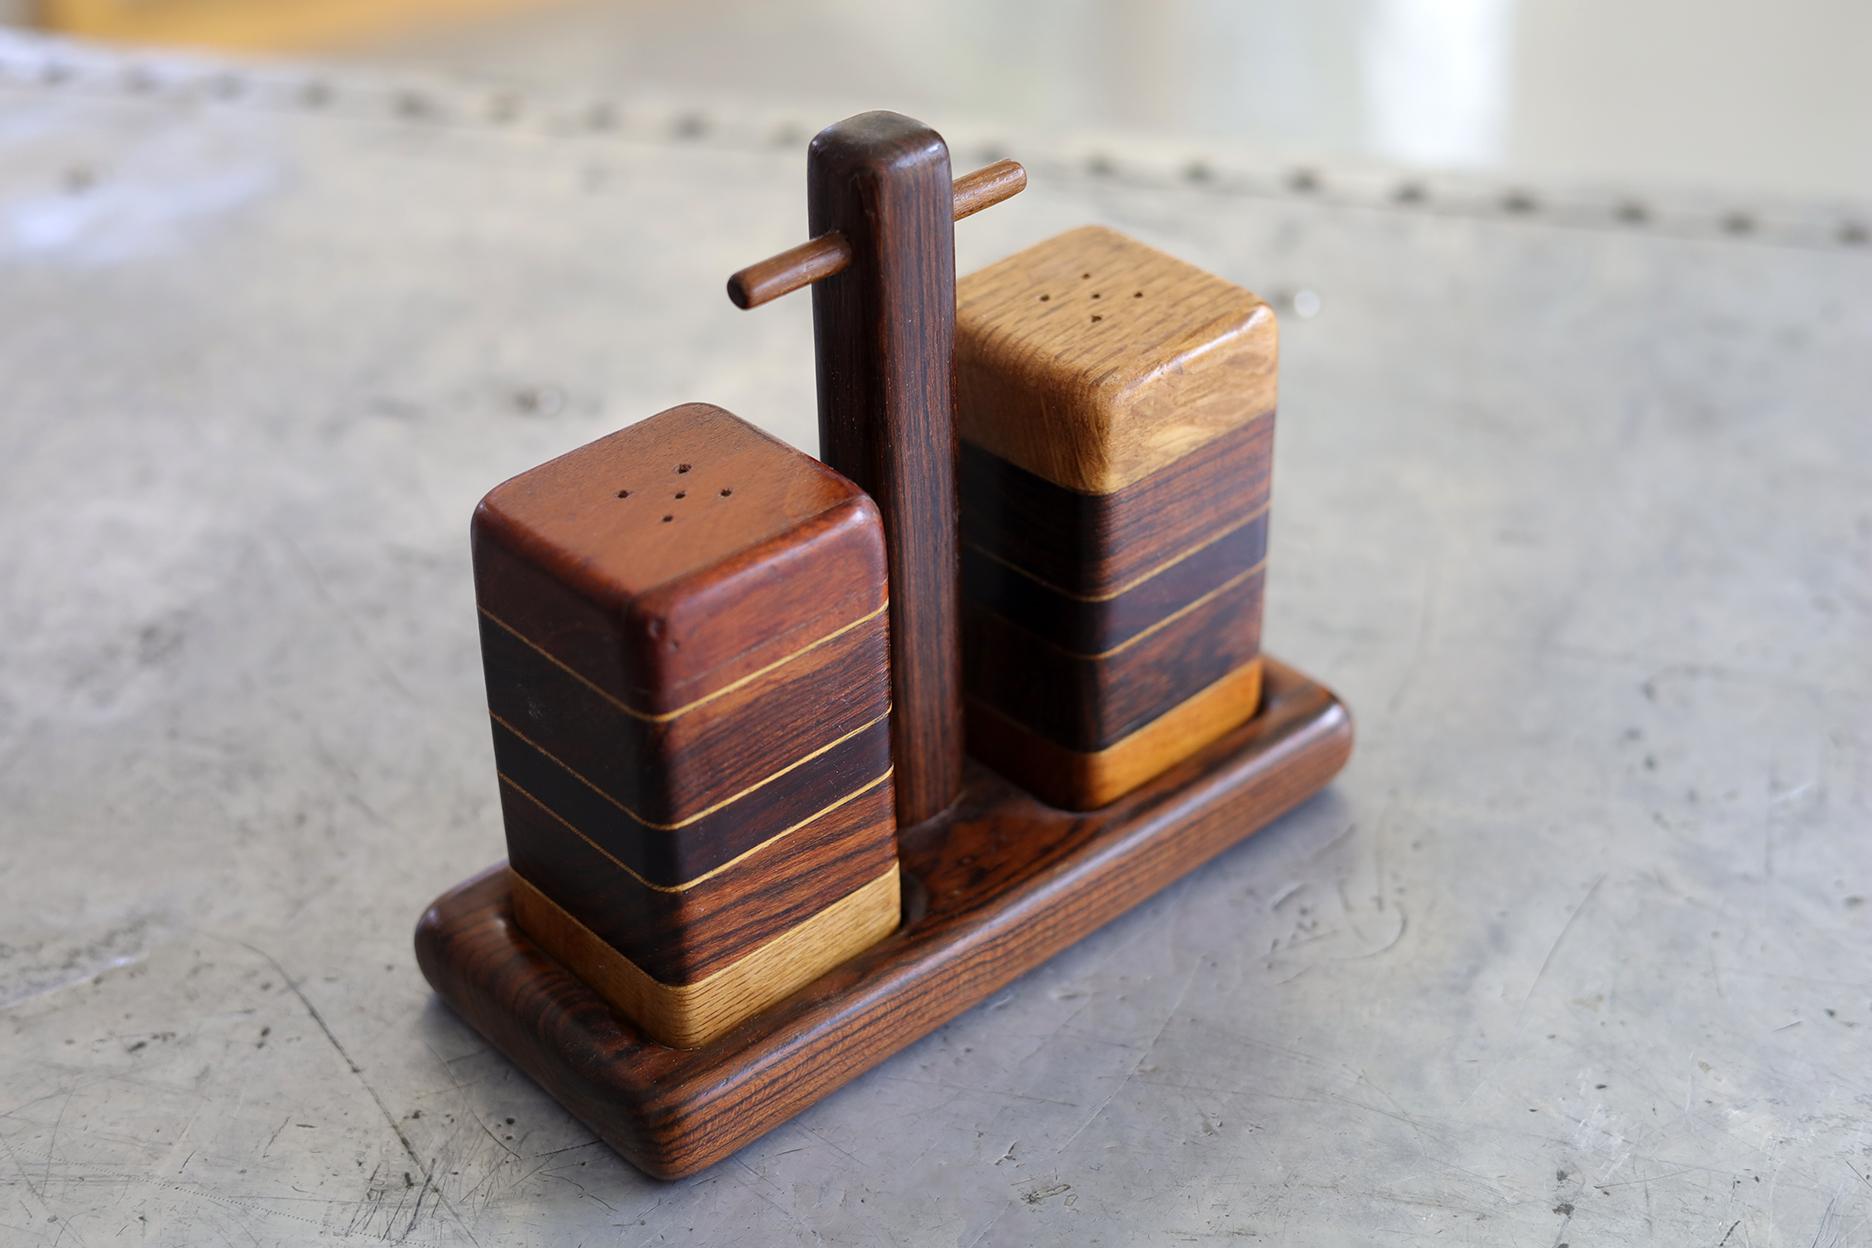 Very special Salt and Pepper set. Very nice craftsmanship made of different wood species by master wood maker Don Shoemaker in Michoacan Mexico.
Very good condition.